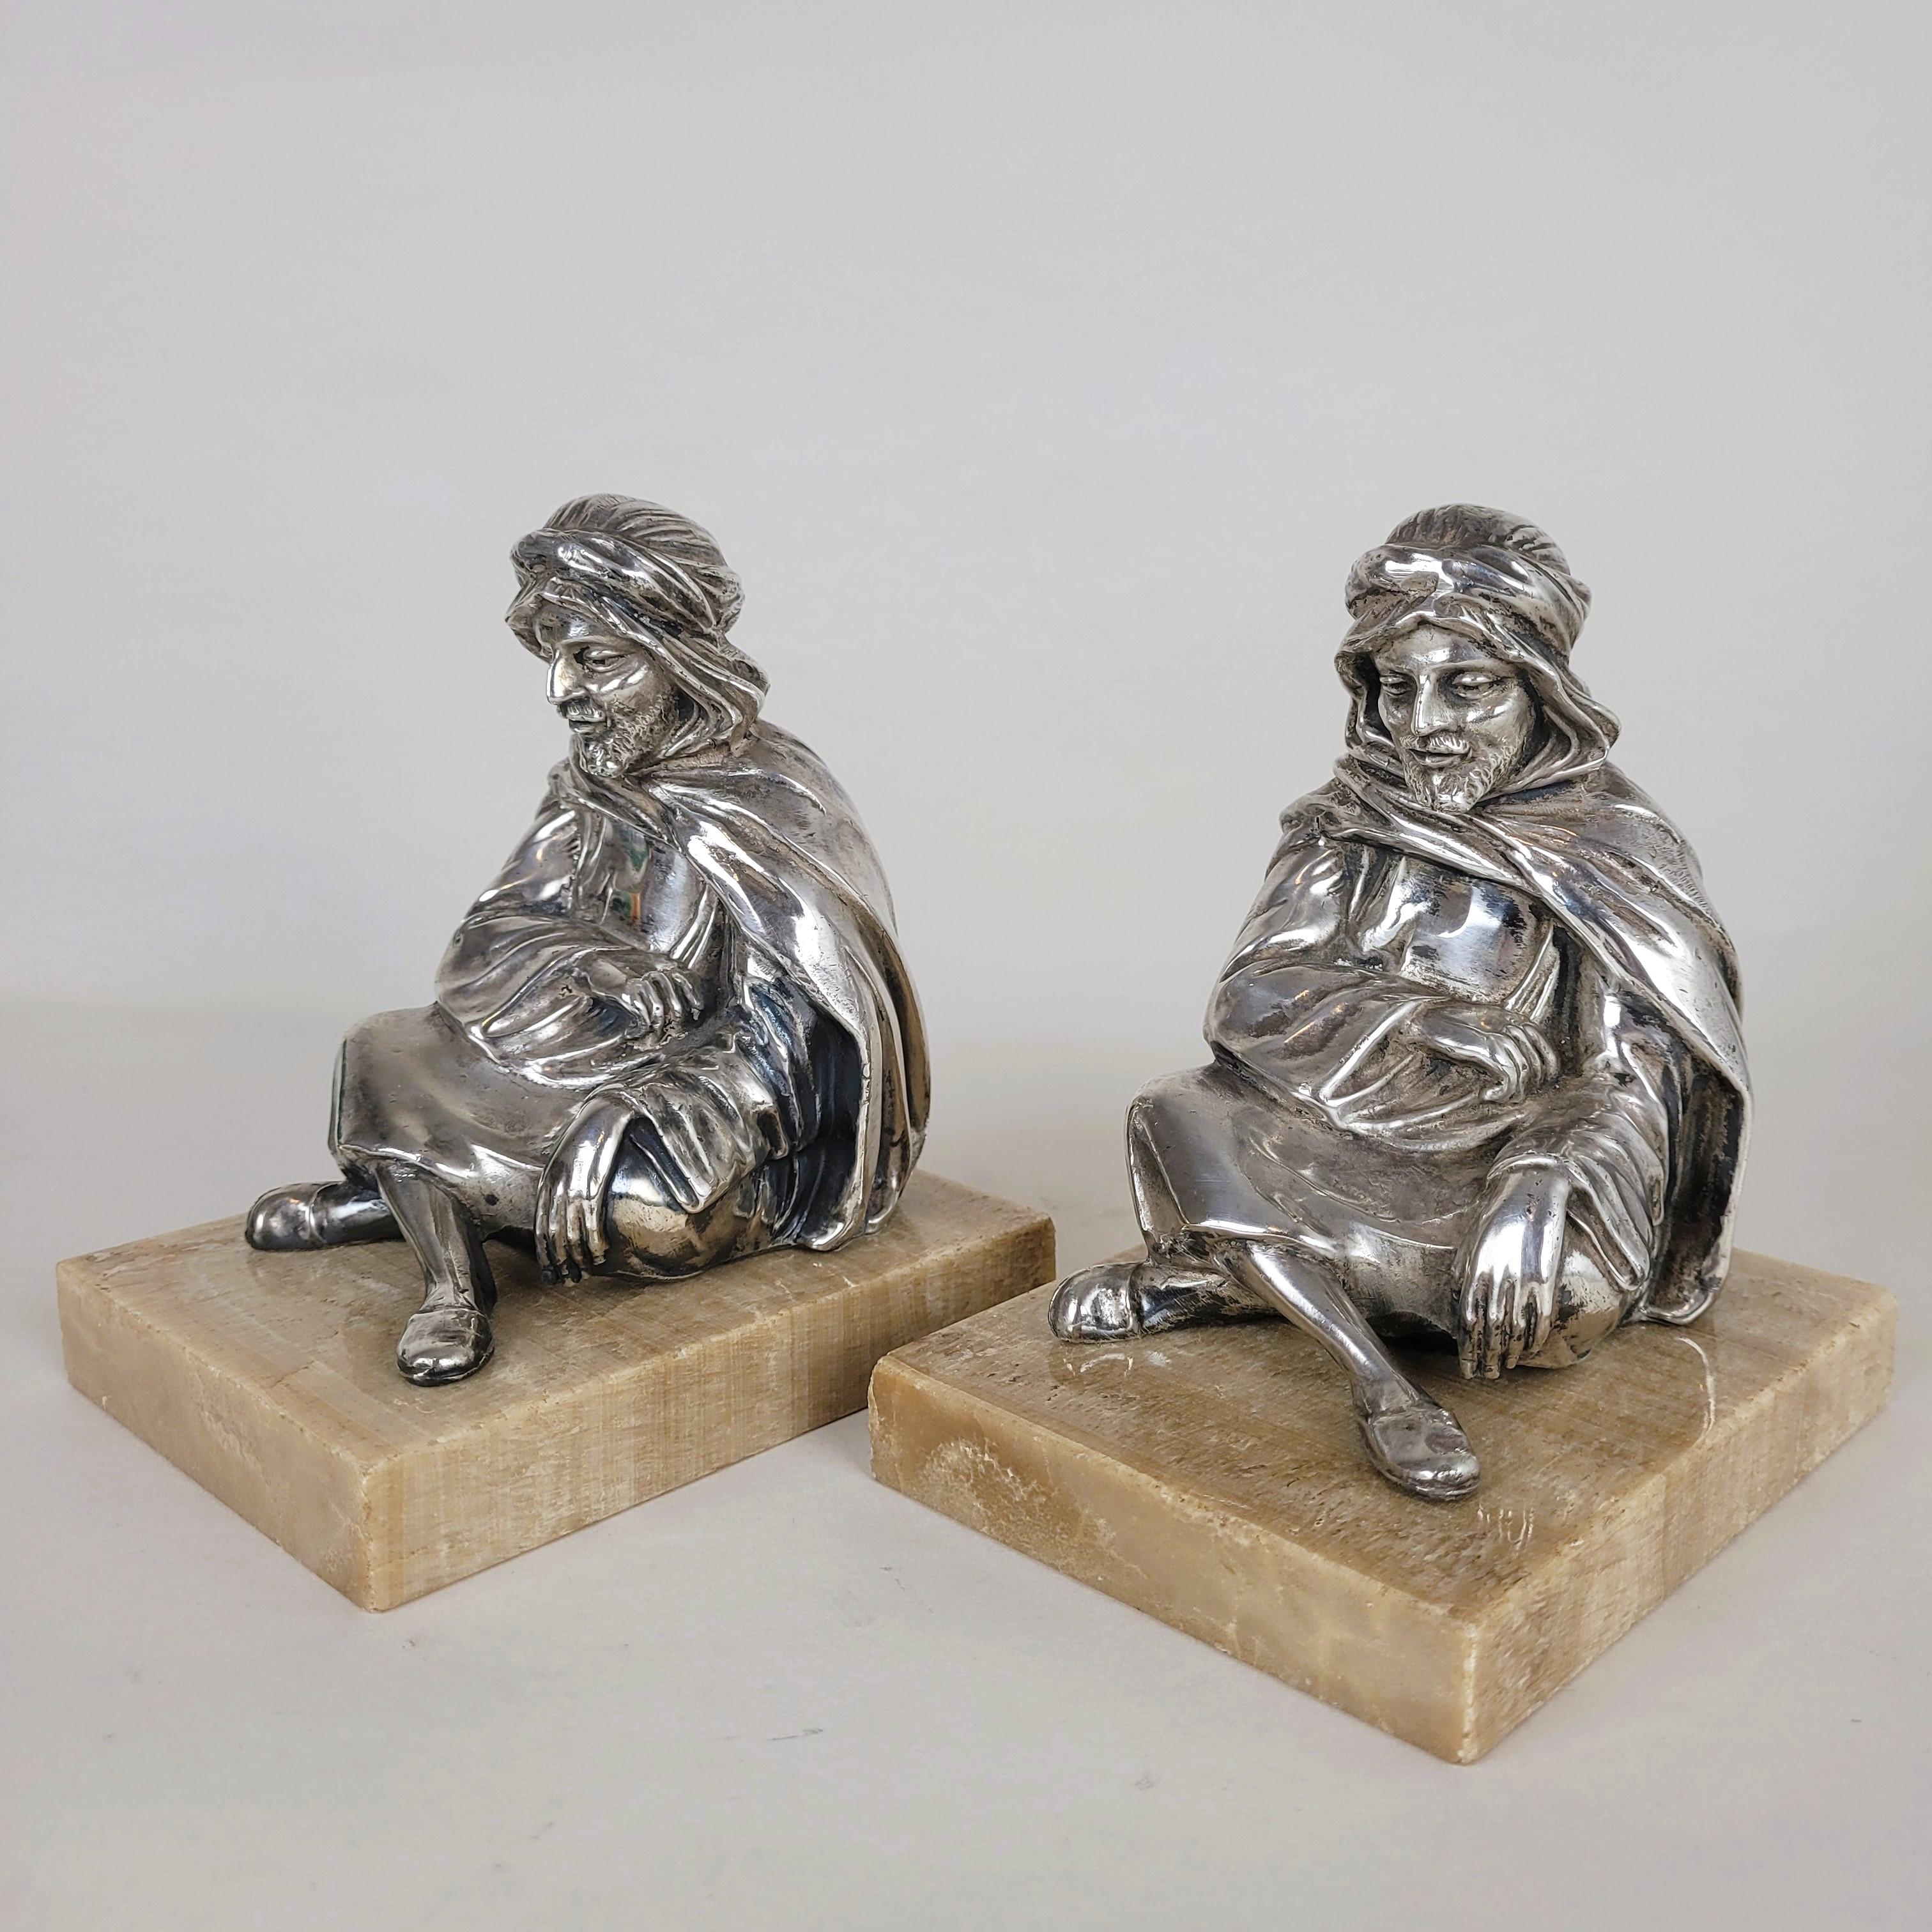 Pair of bookends representing seated orientals, wrapped in their scarves.

Figures in silver-plated metal, on an onyx base

Good general condition, tiny chips to the marble

Height 13.5 cm
9.5 x 12.5 cm